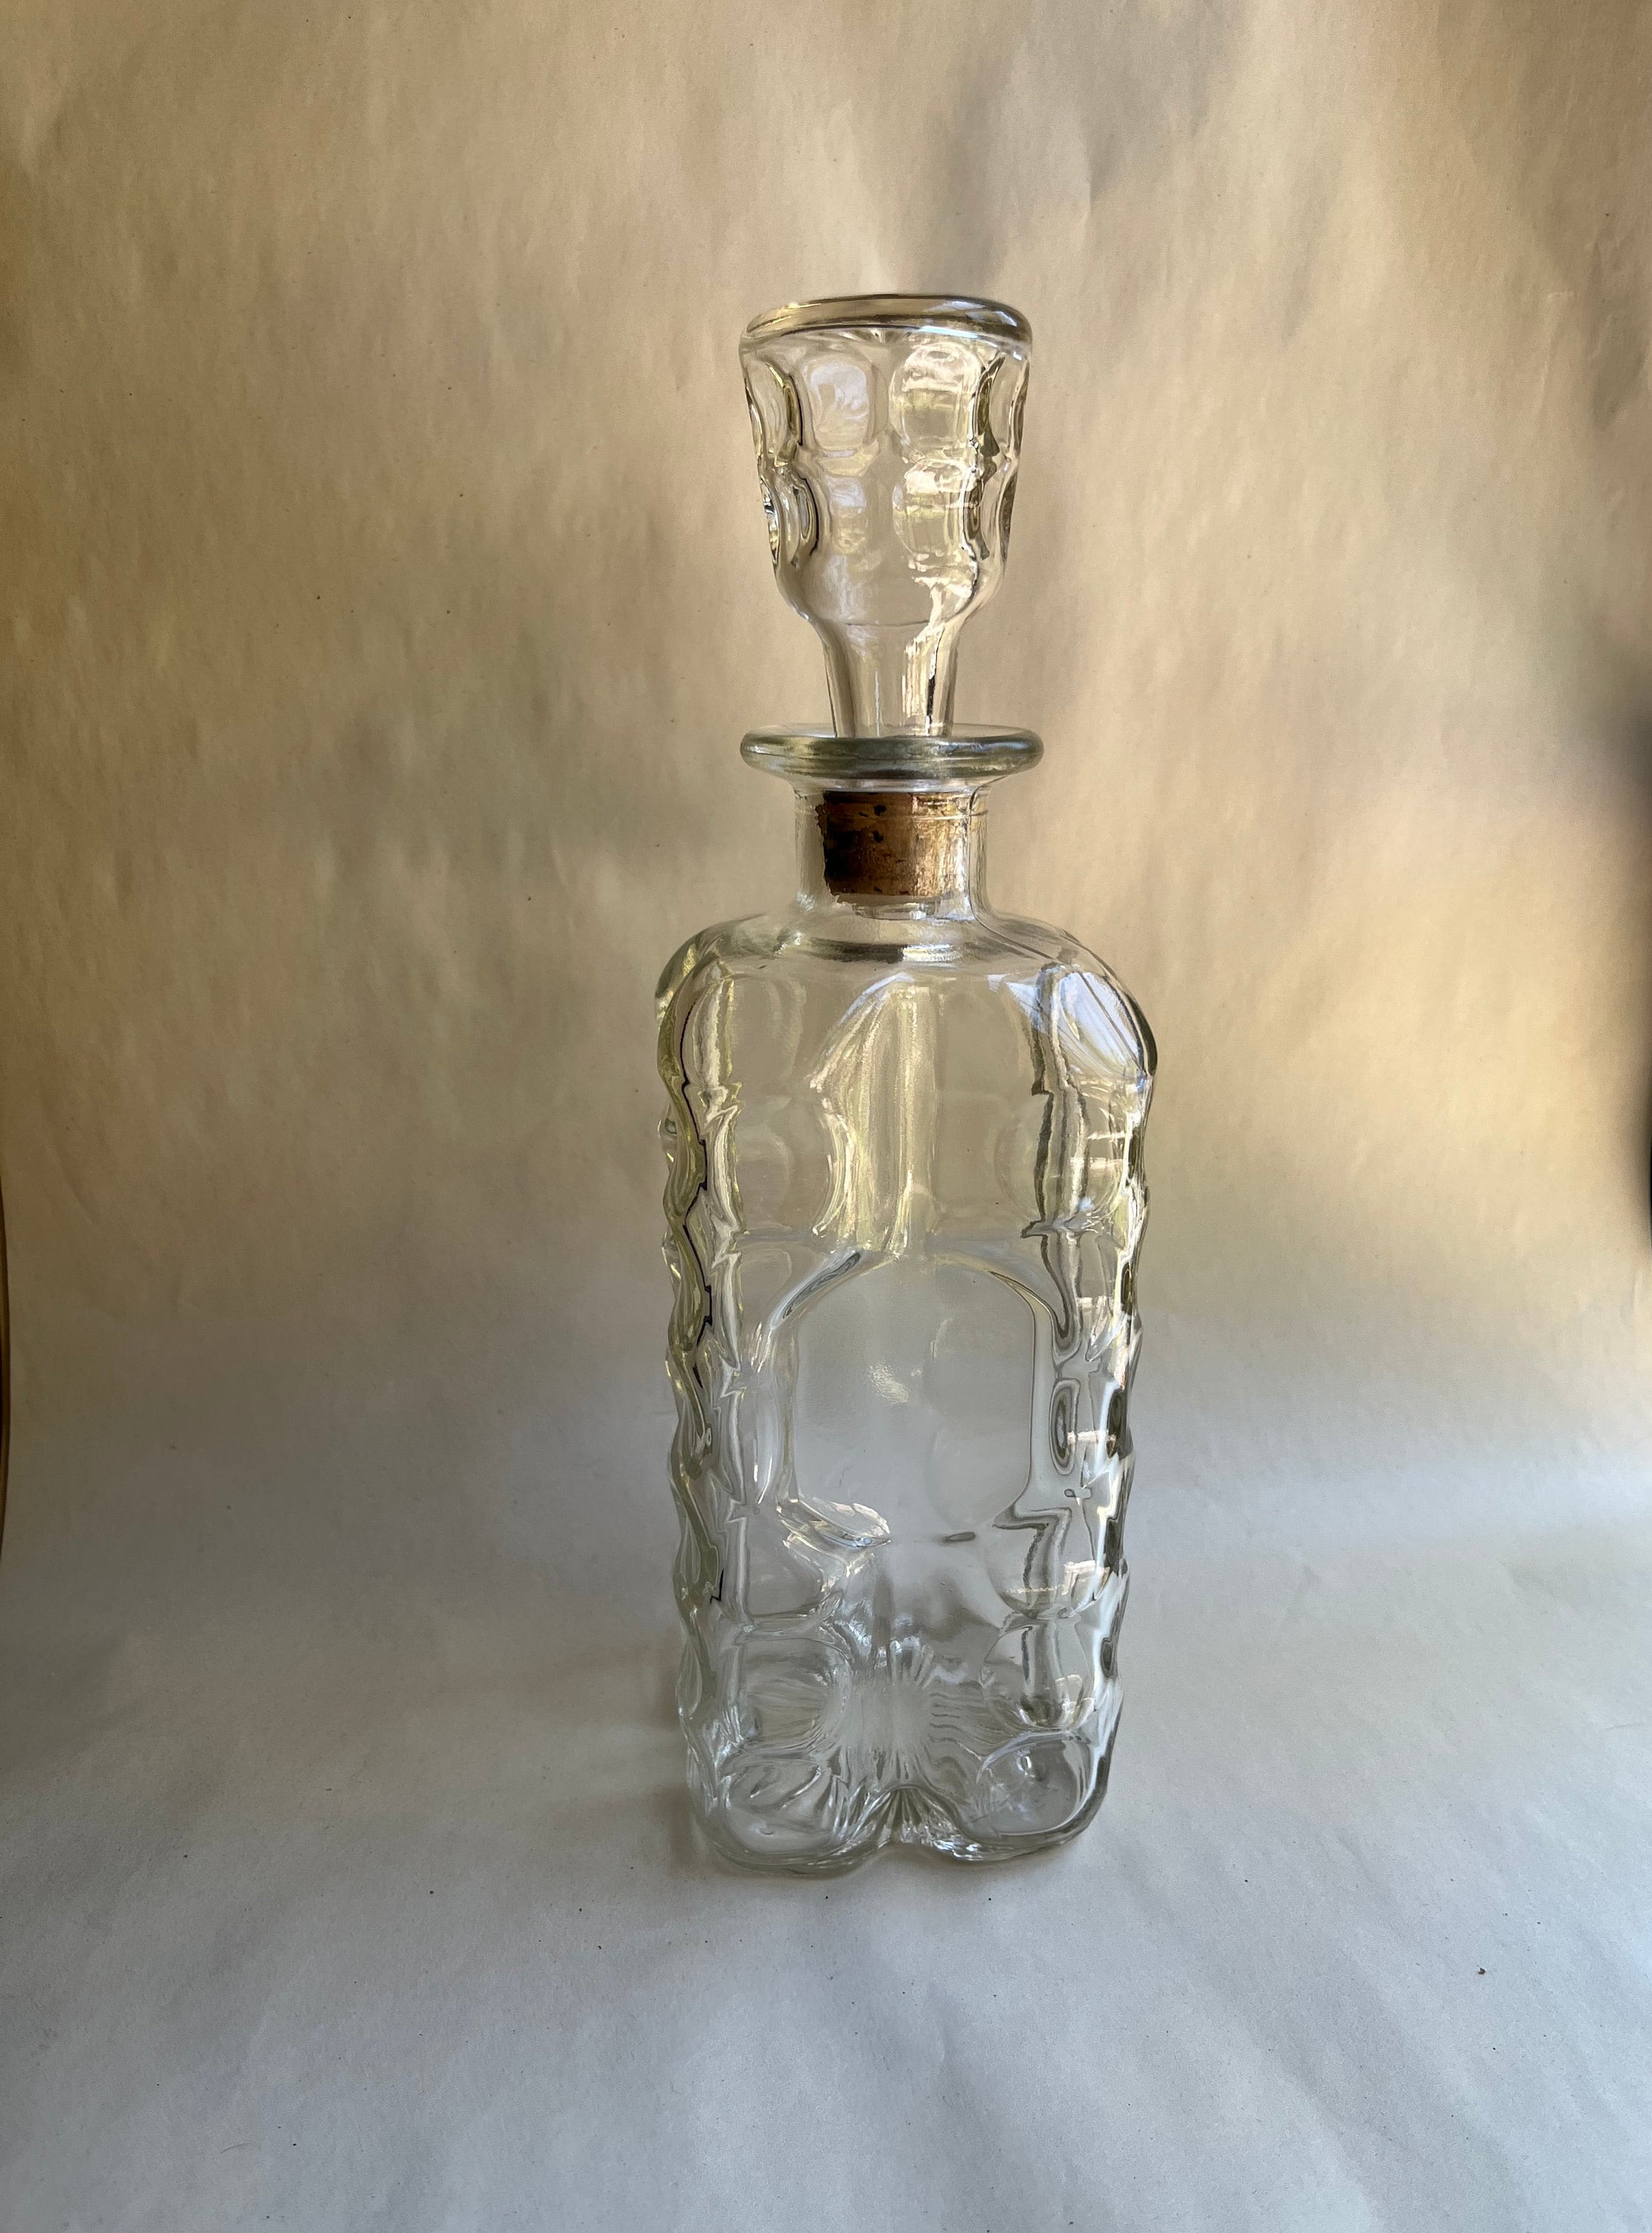 Italian Pressed Glass Figural Liquor Bottle Victorian Lady Decanter Bottle  AS IS 